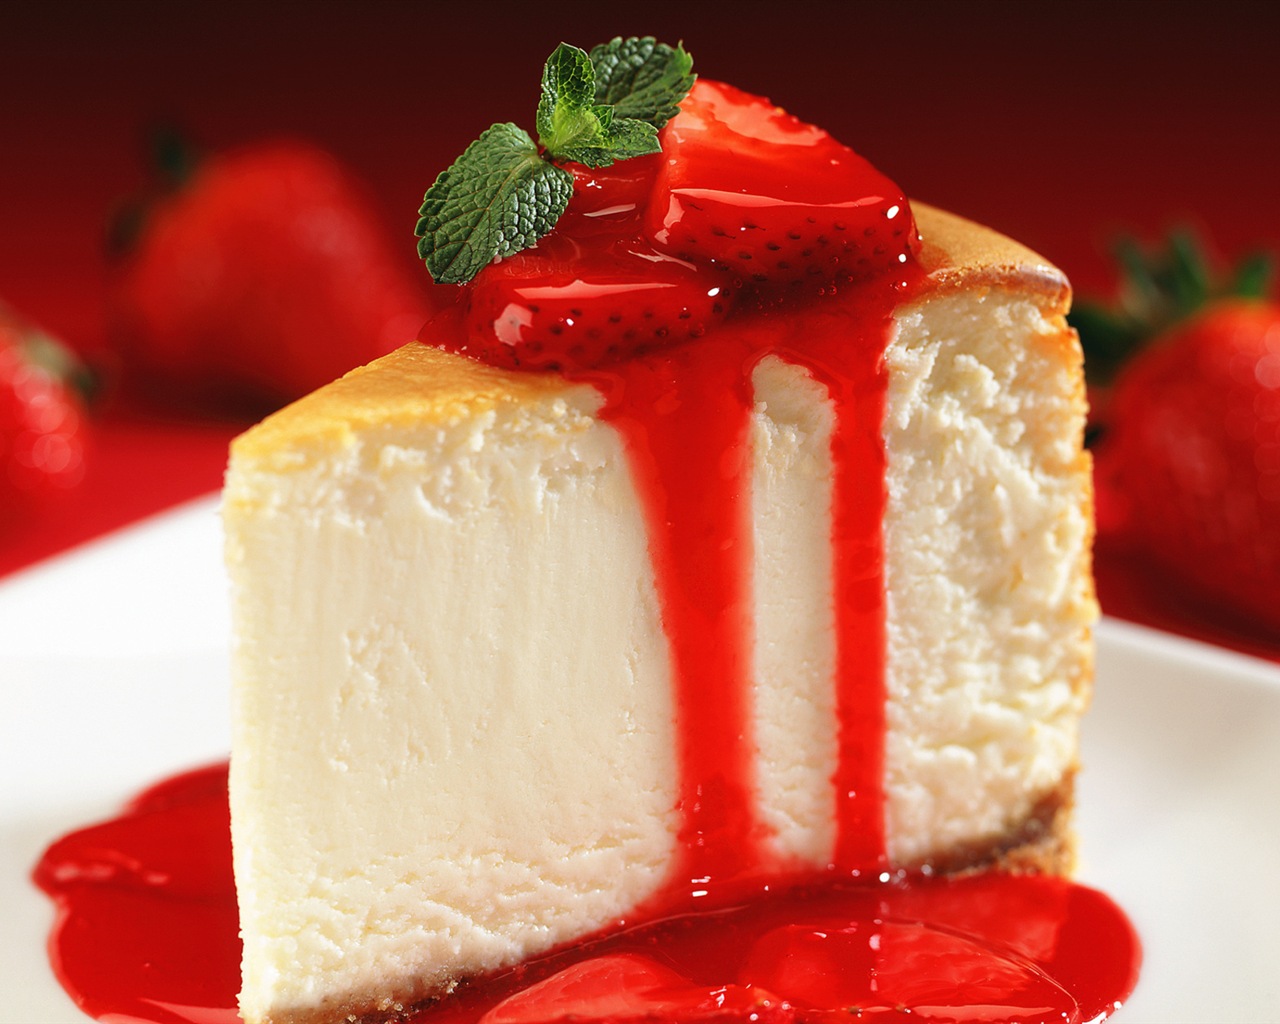 Delicious strawberry cake HD wallpapers #8 - 1280x1024